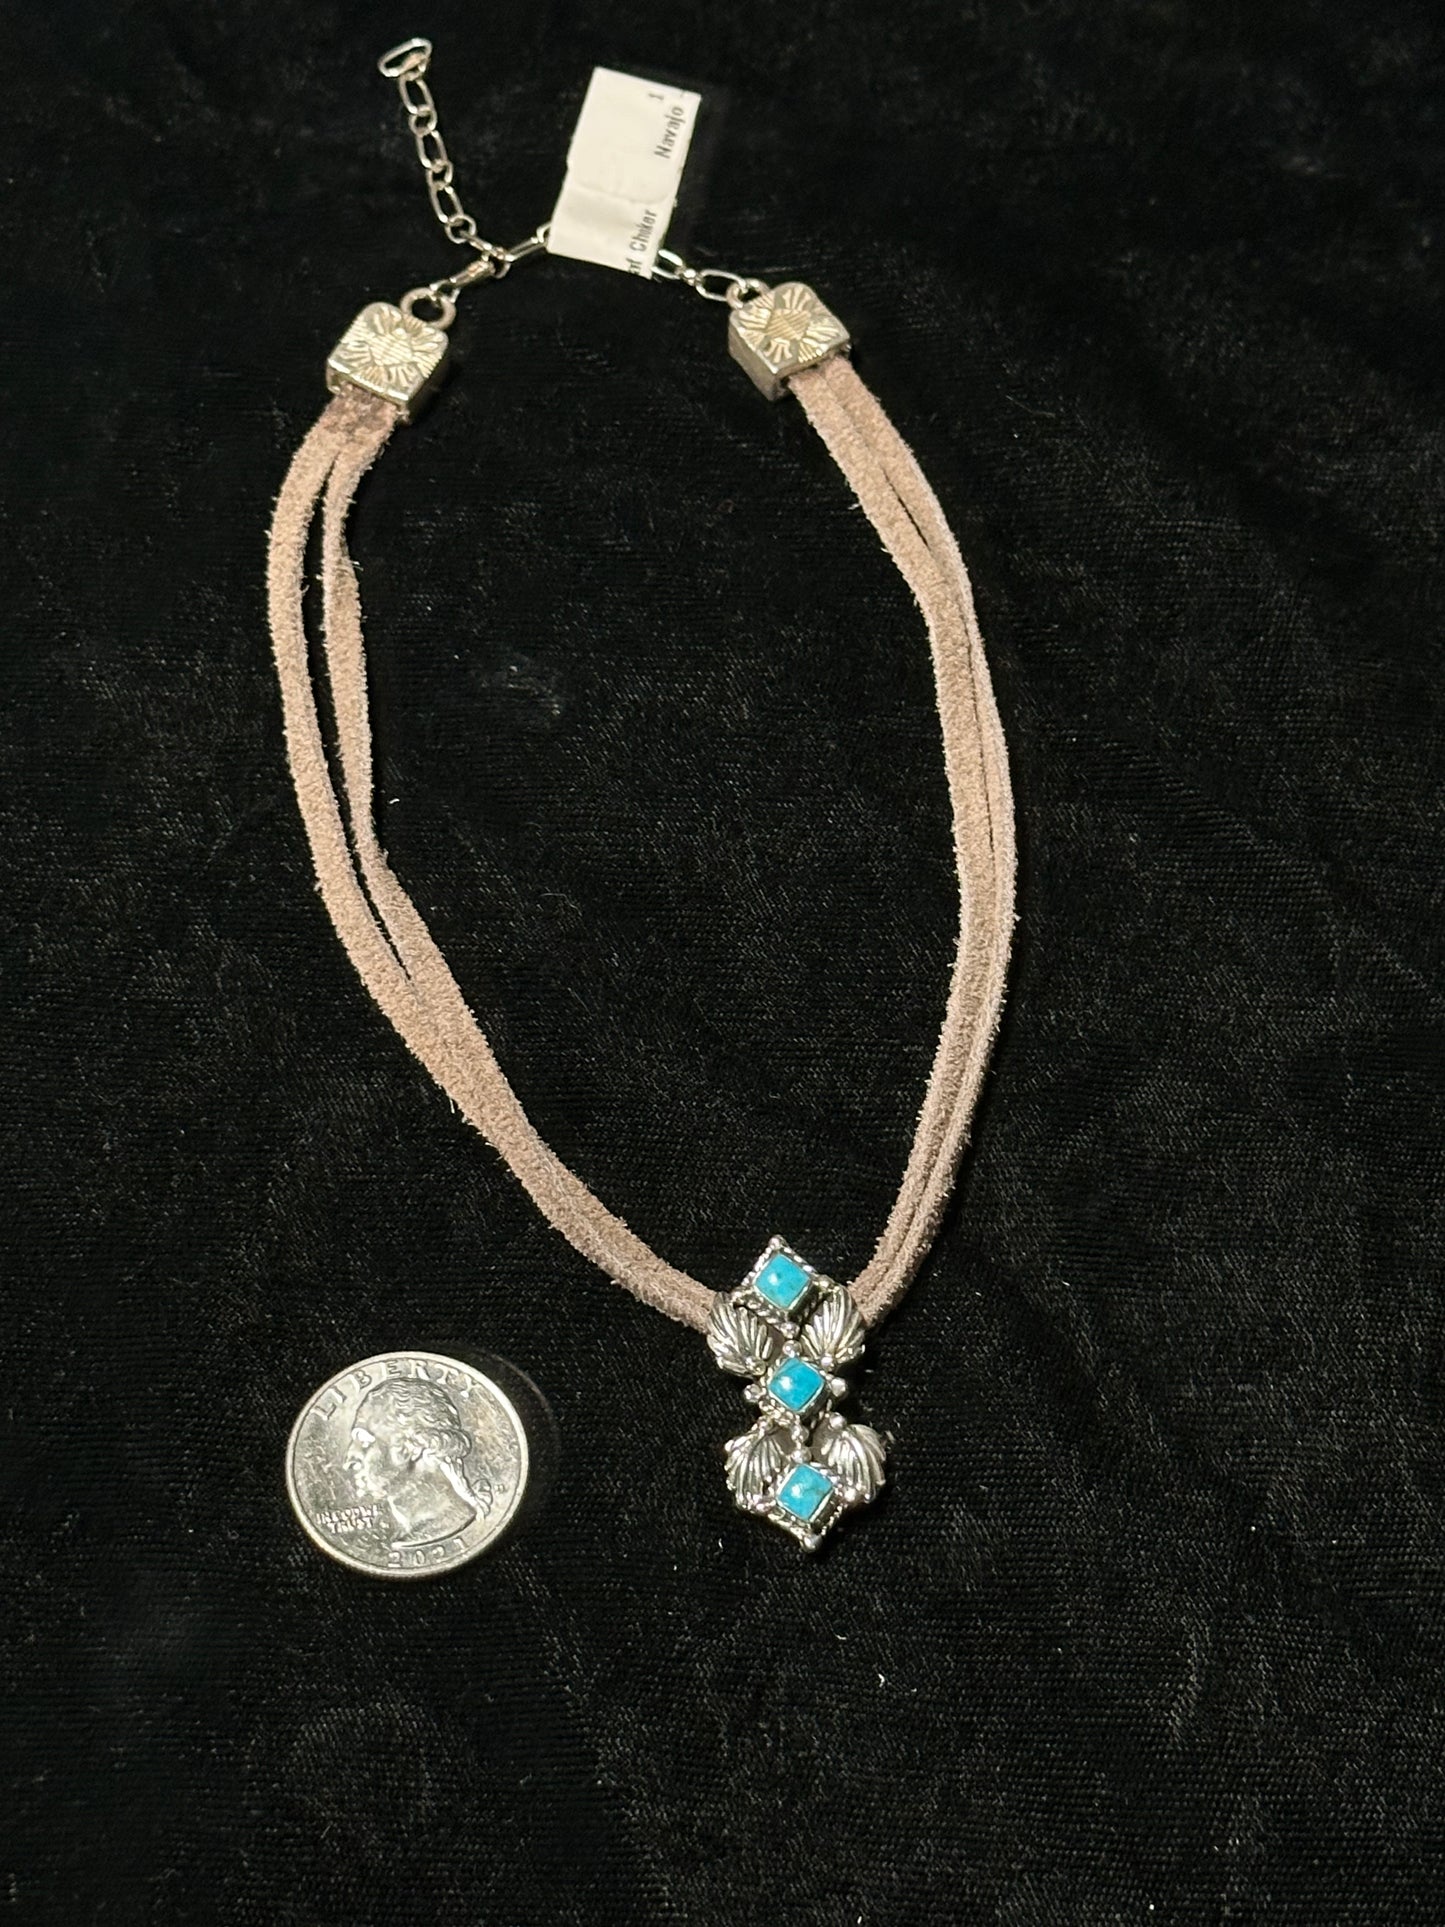 12" Suede Chain with Sleeping Beauty Turquoise Pendent by Loretta Delgarito, Navajo